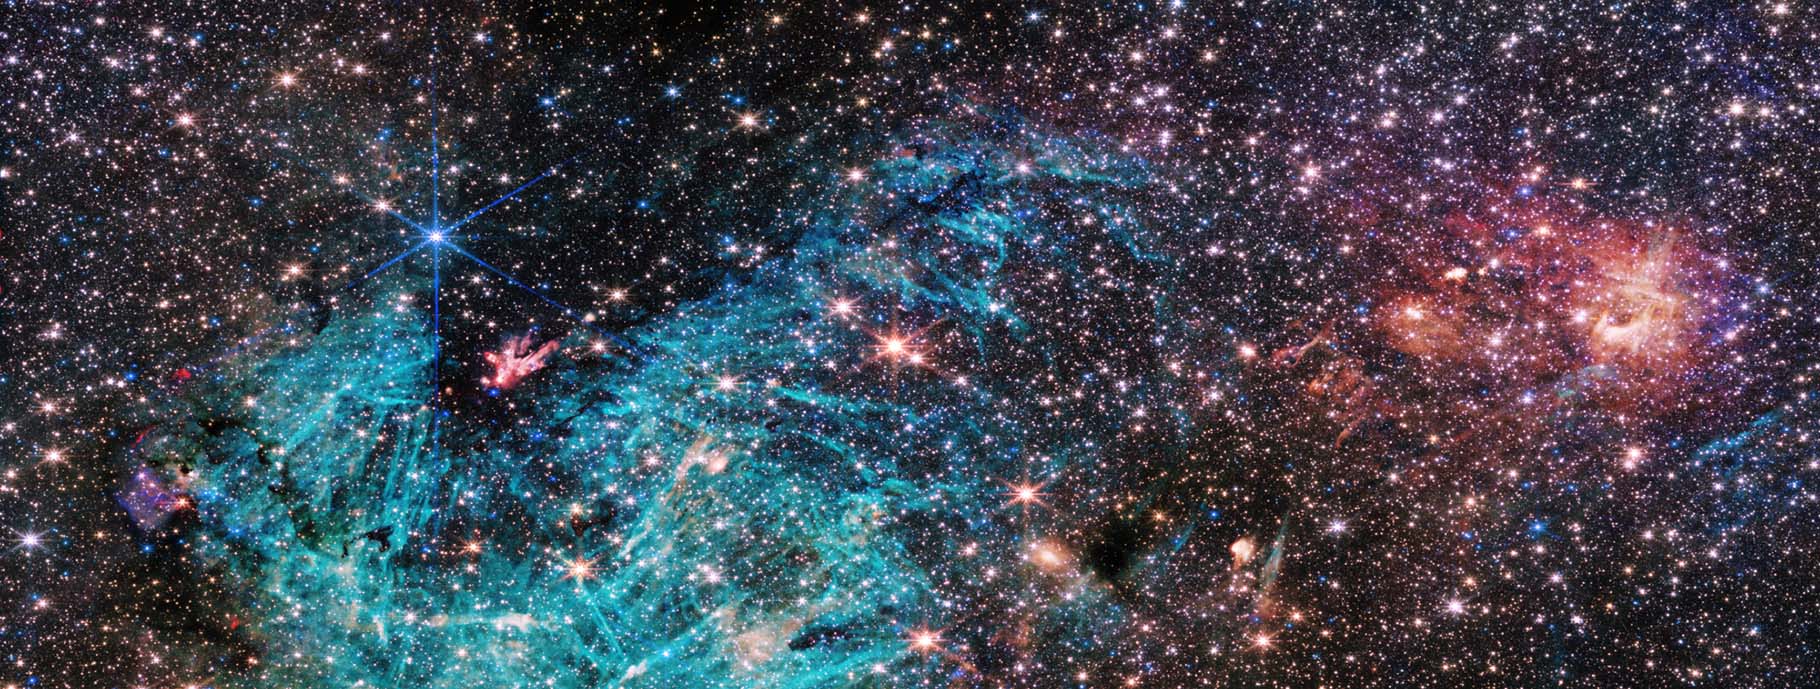 a funnel-shaped region of space appears darker than its surroundings with fewer stars. It is wider at the top edge of the image, narrowing towards the bottom. Toward the narrow end of this dark region a small clump of red and white appears to shoot out streamers upward and left. A large, bright cyan-colored area surrounds the lower portion of the funnel-shaped dark area, forming a rough U shape. The cyan-colored area has needle-like, linear structures and becomes more diffuse in the center of the image. The right side of the image is dominated by clouds of orange and red, with a purple haze.